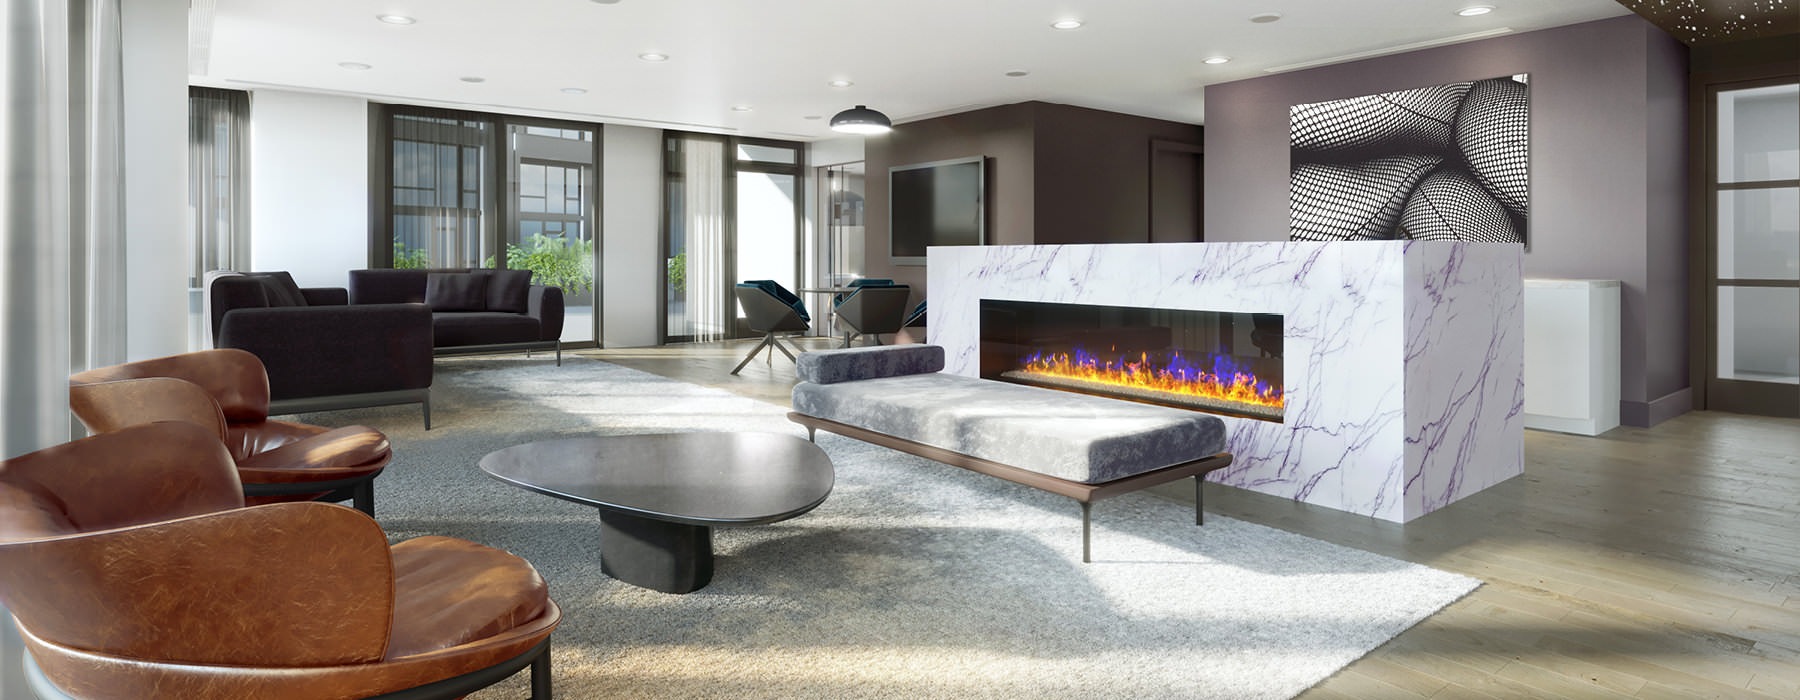 open Rigby lounge with fireplace seating and recessed lighting throughout